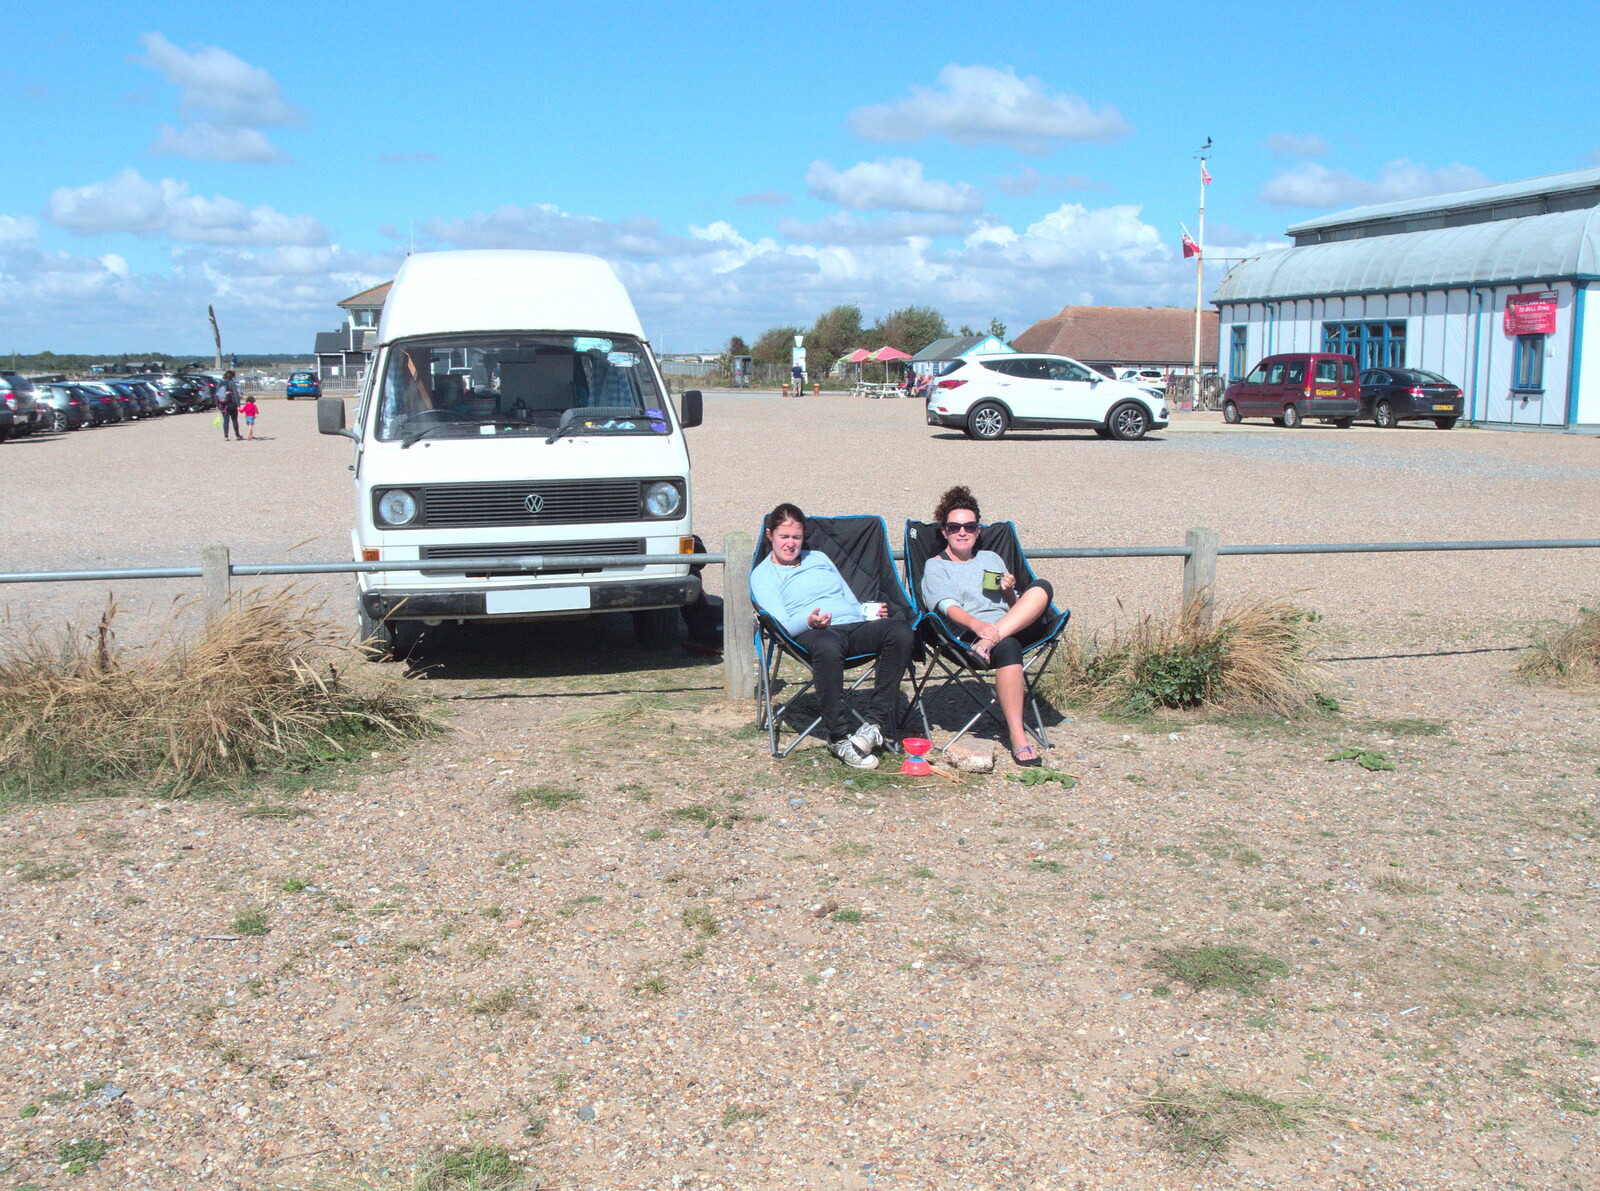 Isobel and Evelyn drink tea in front of the van from A Day on the Beach, Southwold, Suffolk - 25th August 2018